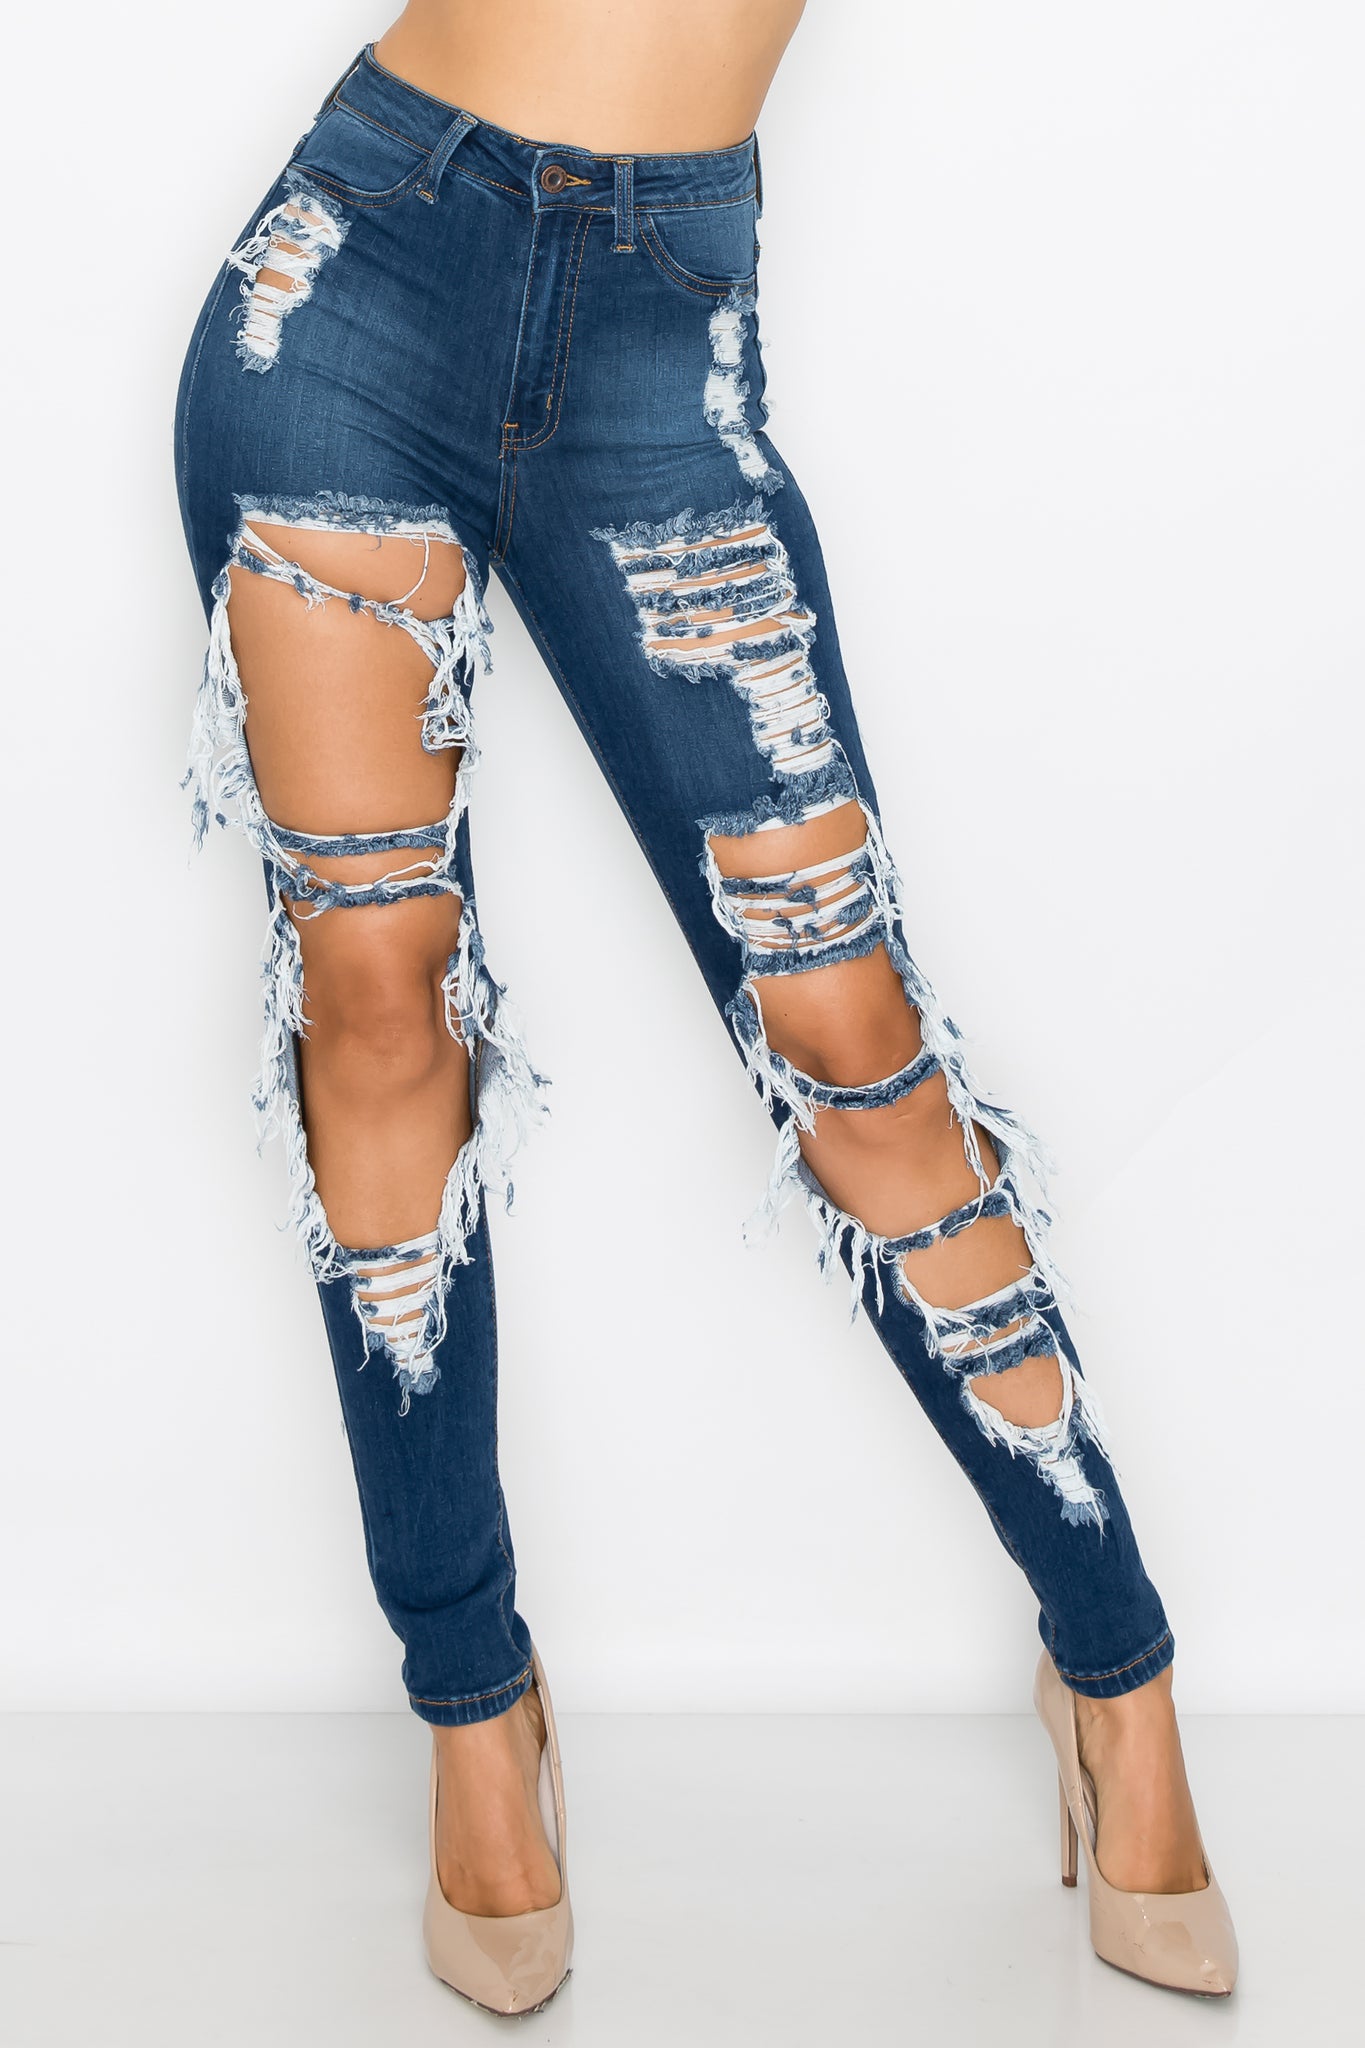 How to Distress Jeans?, Ripped Jeans, Torn Jeans or Destroyed Jeans